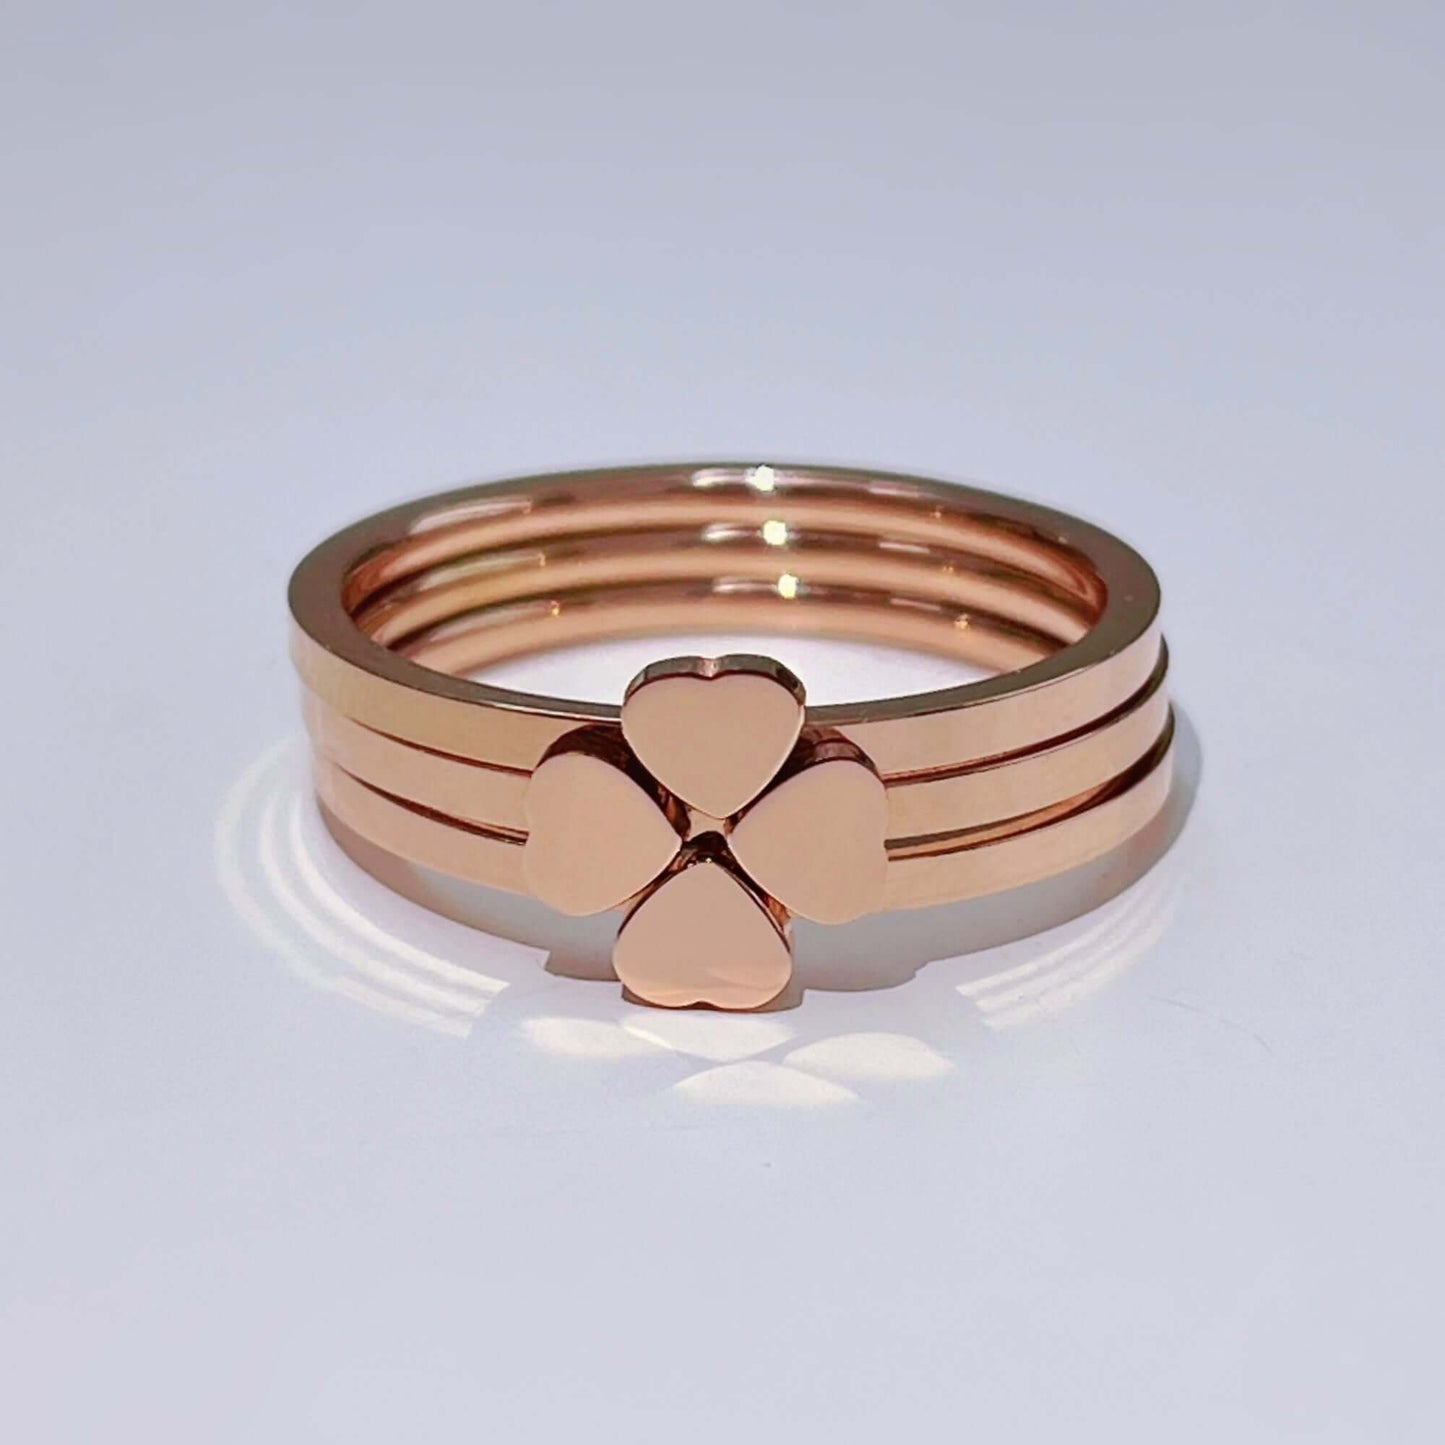 3 Pcs Stackable Heart Clover Ring Set in Rose Gold, 3 Pcs Ring Four-leaf Clover Ring for Women, Three-in-one Ring,